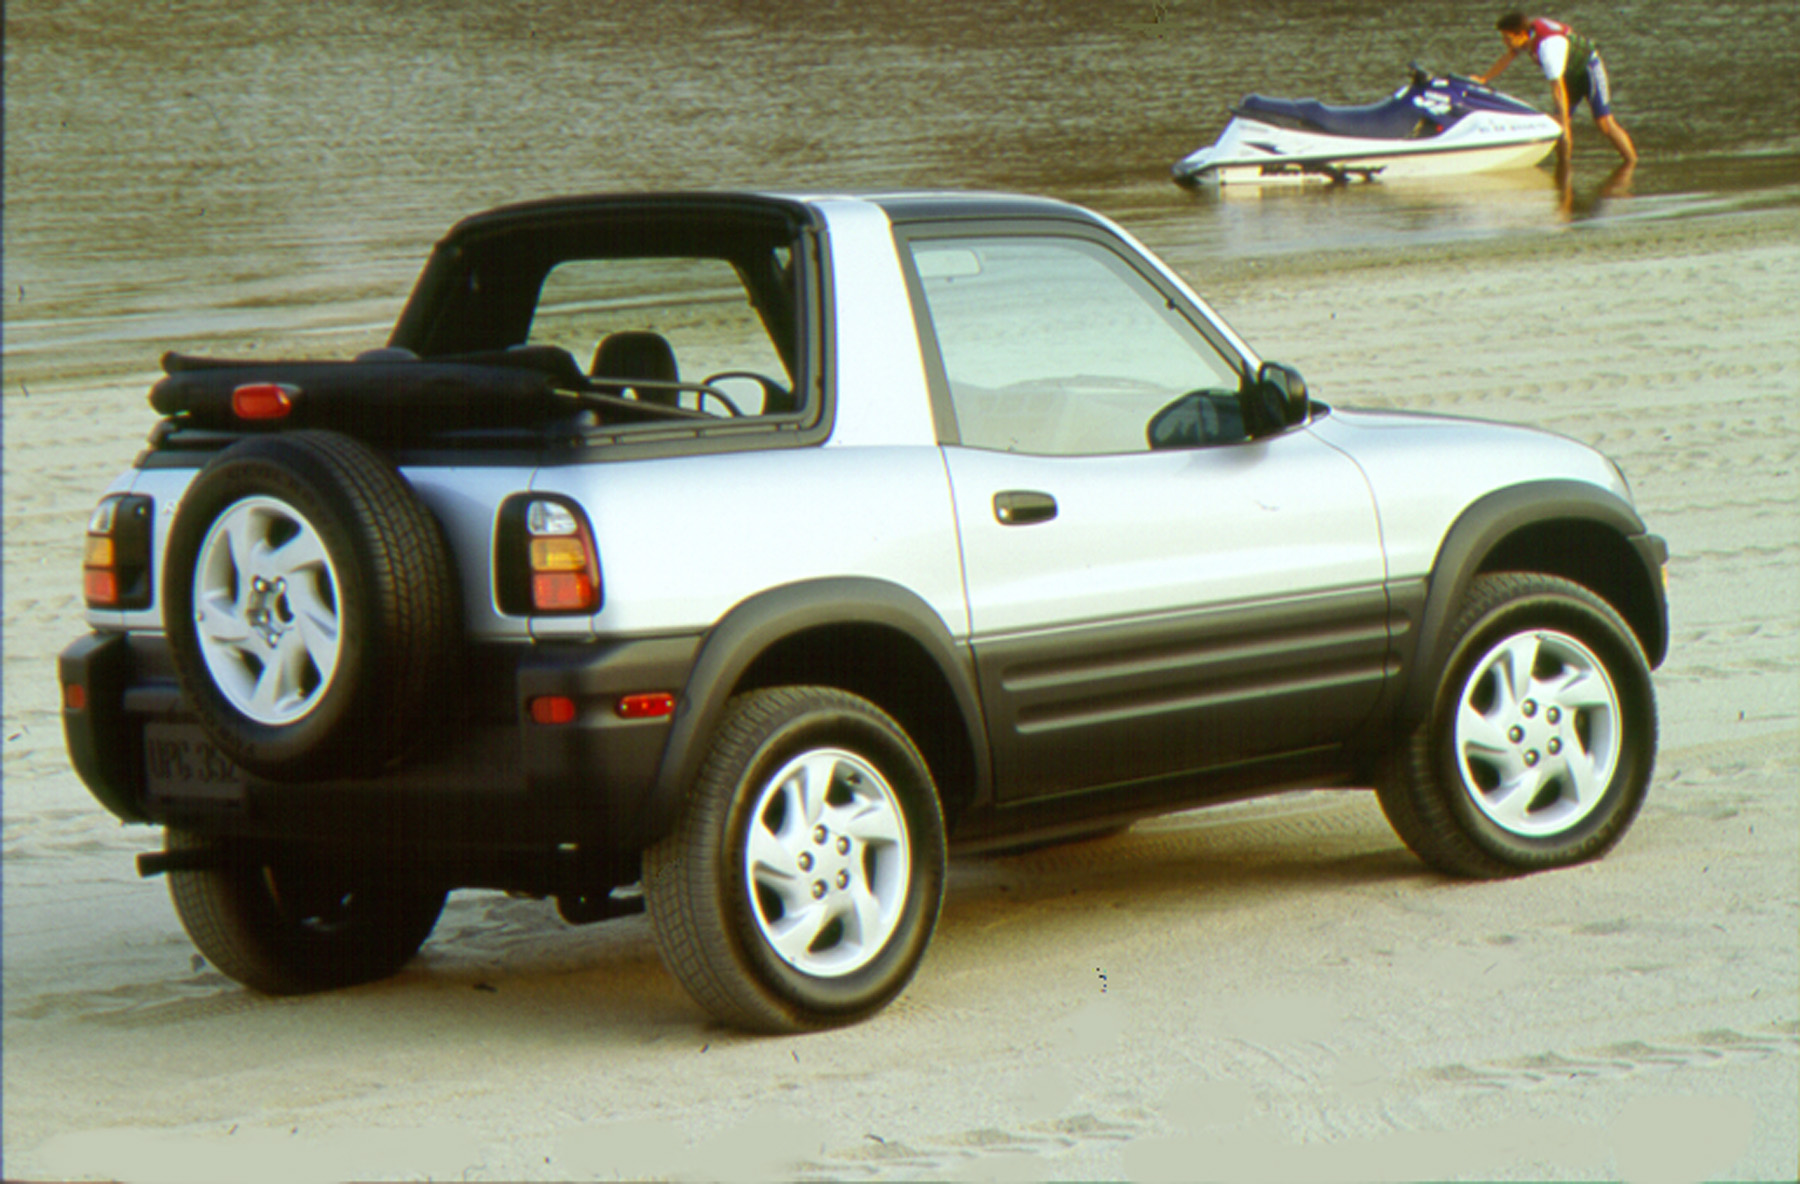 convertible rav4 with soft top down